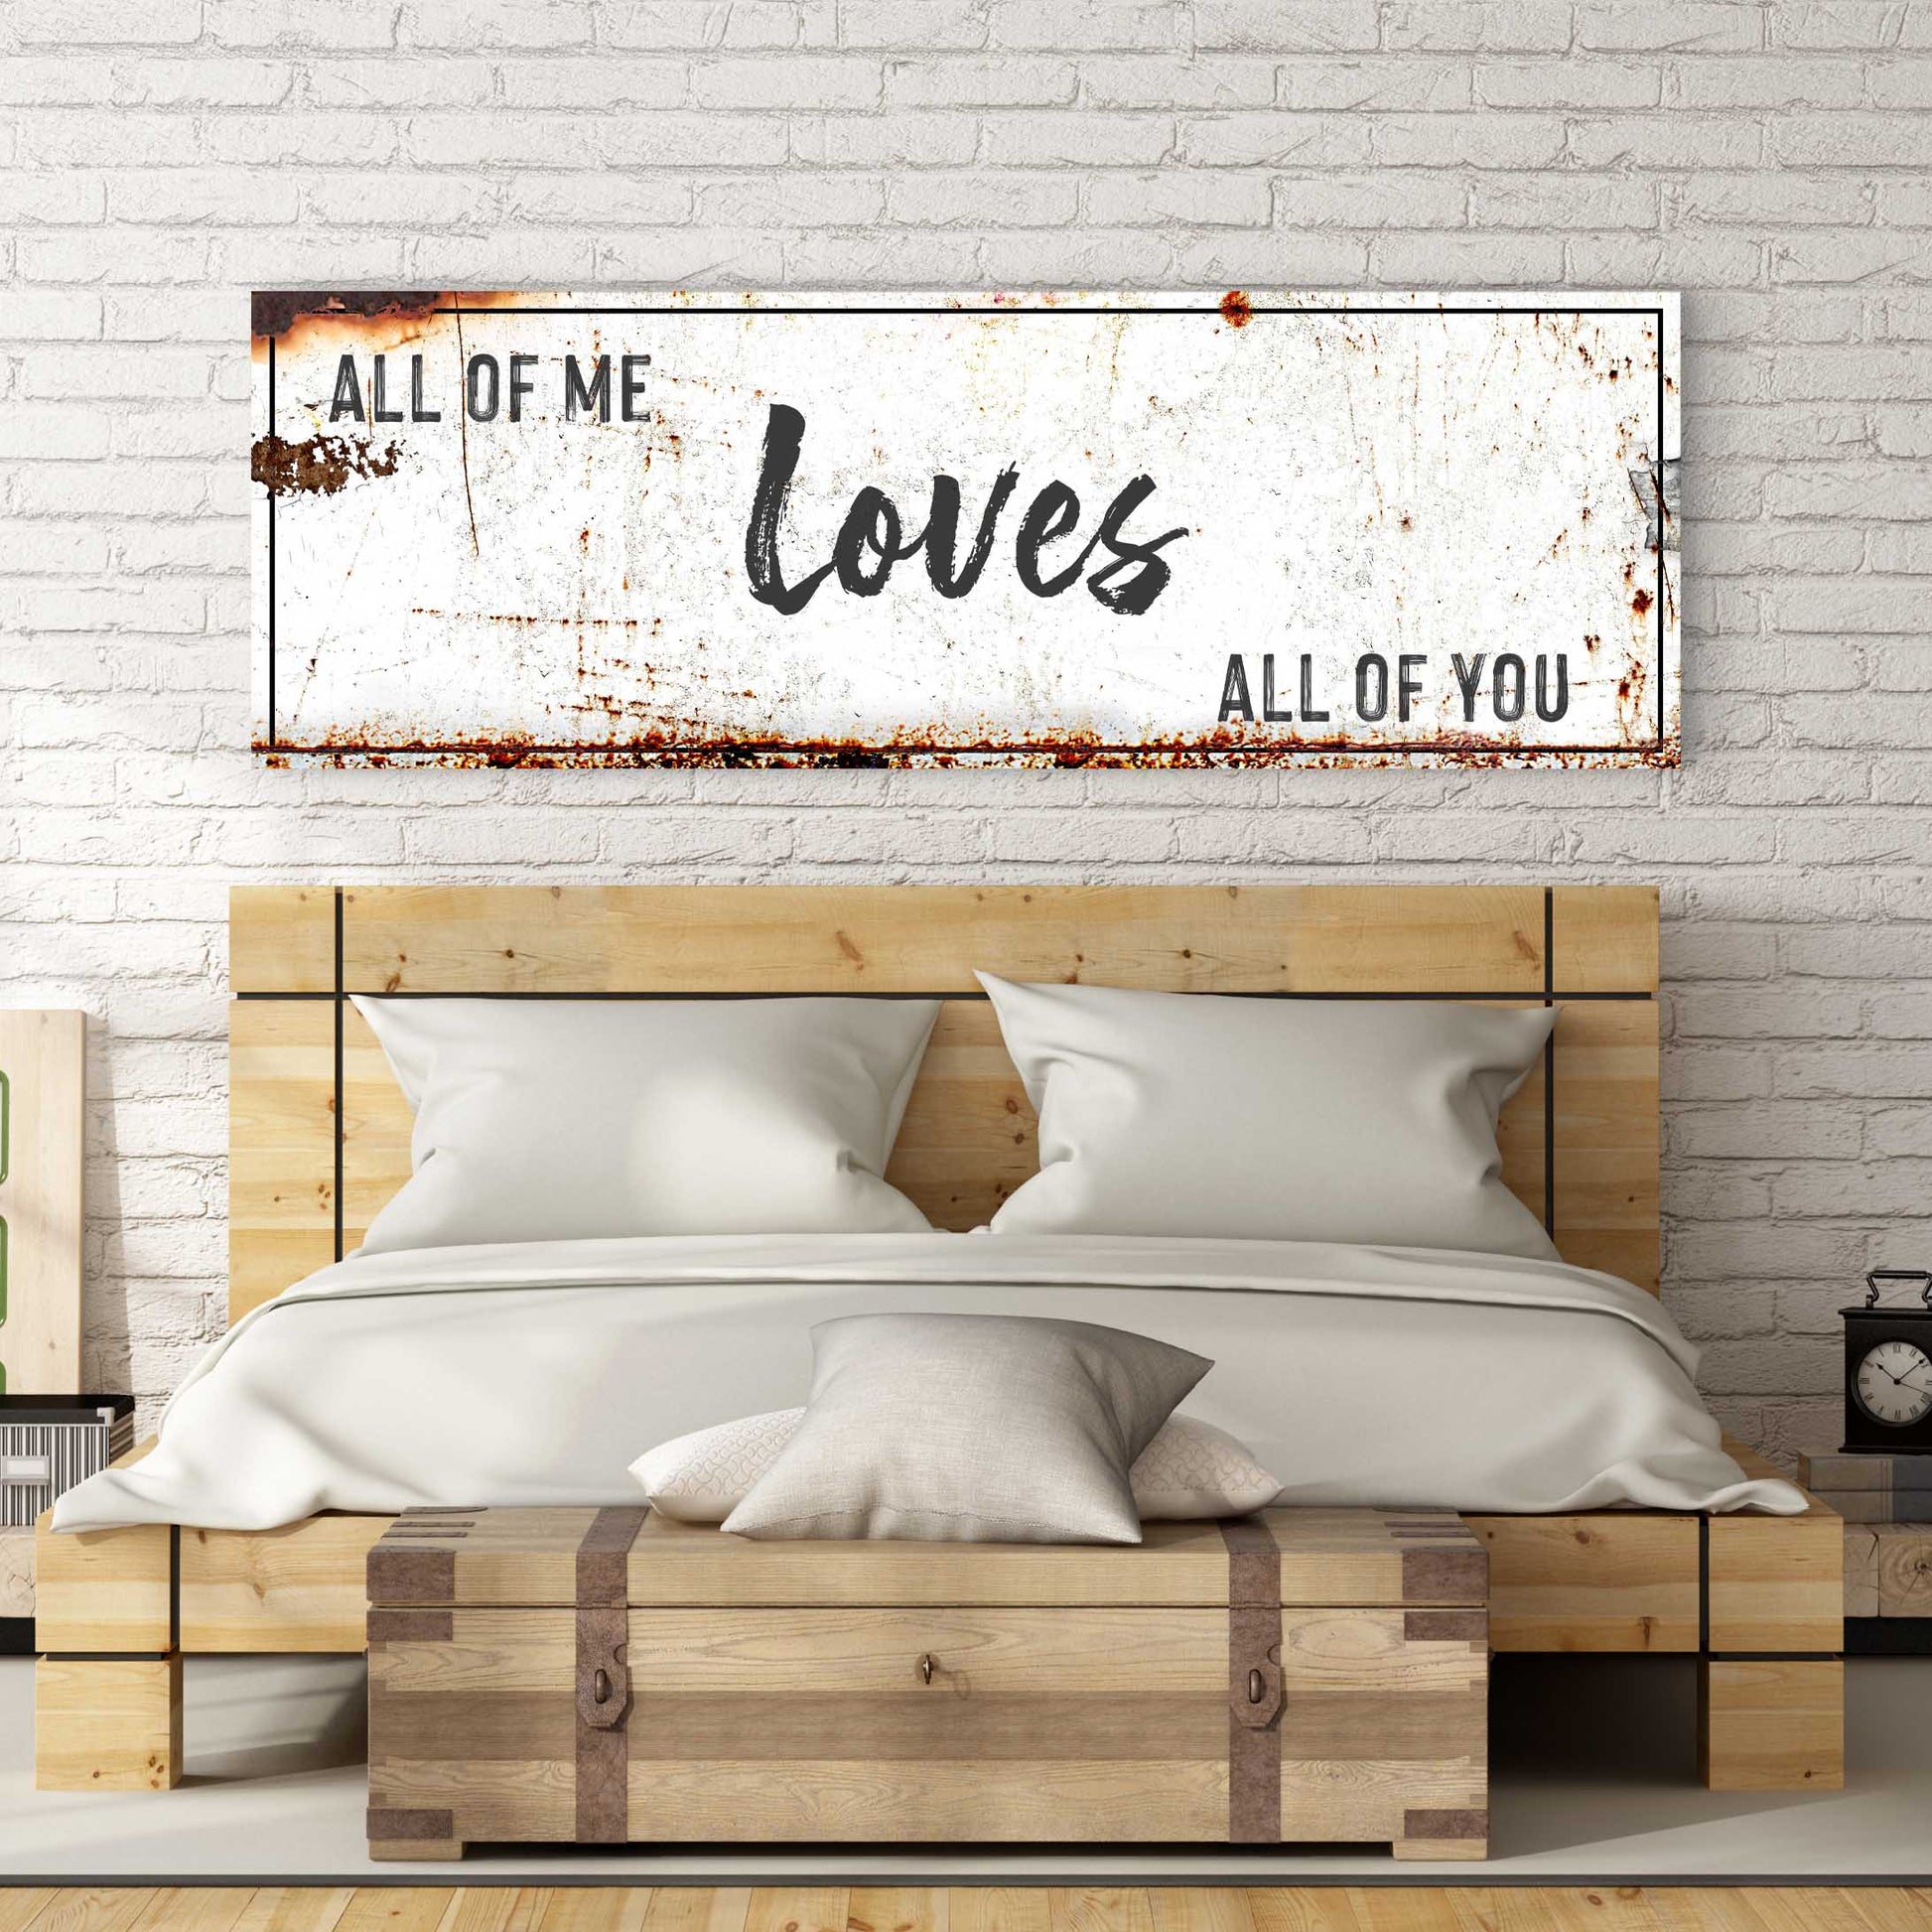 All of me loves all of you Rustic Bedroom Style 1 - Image by Tailored Canvases